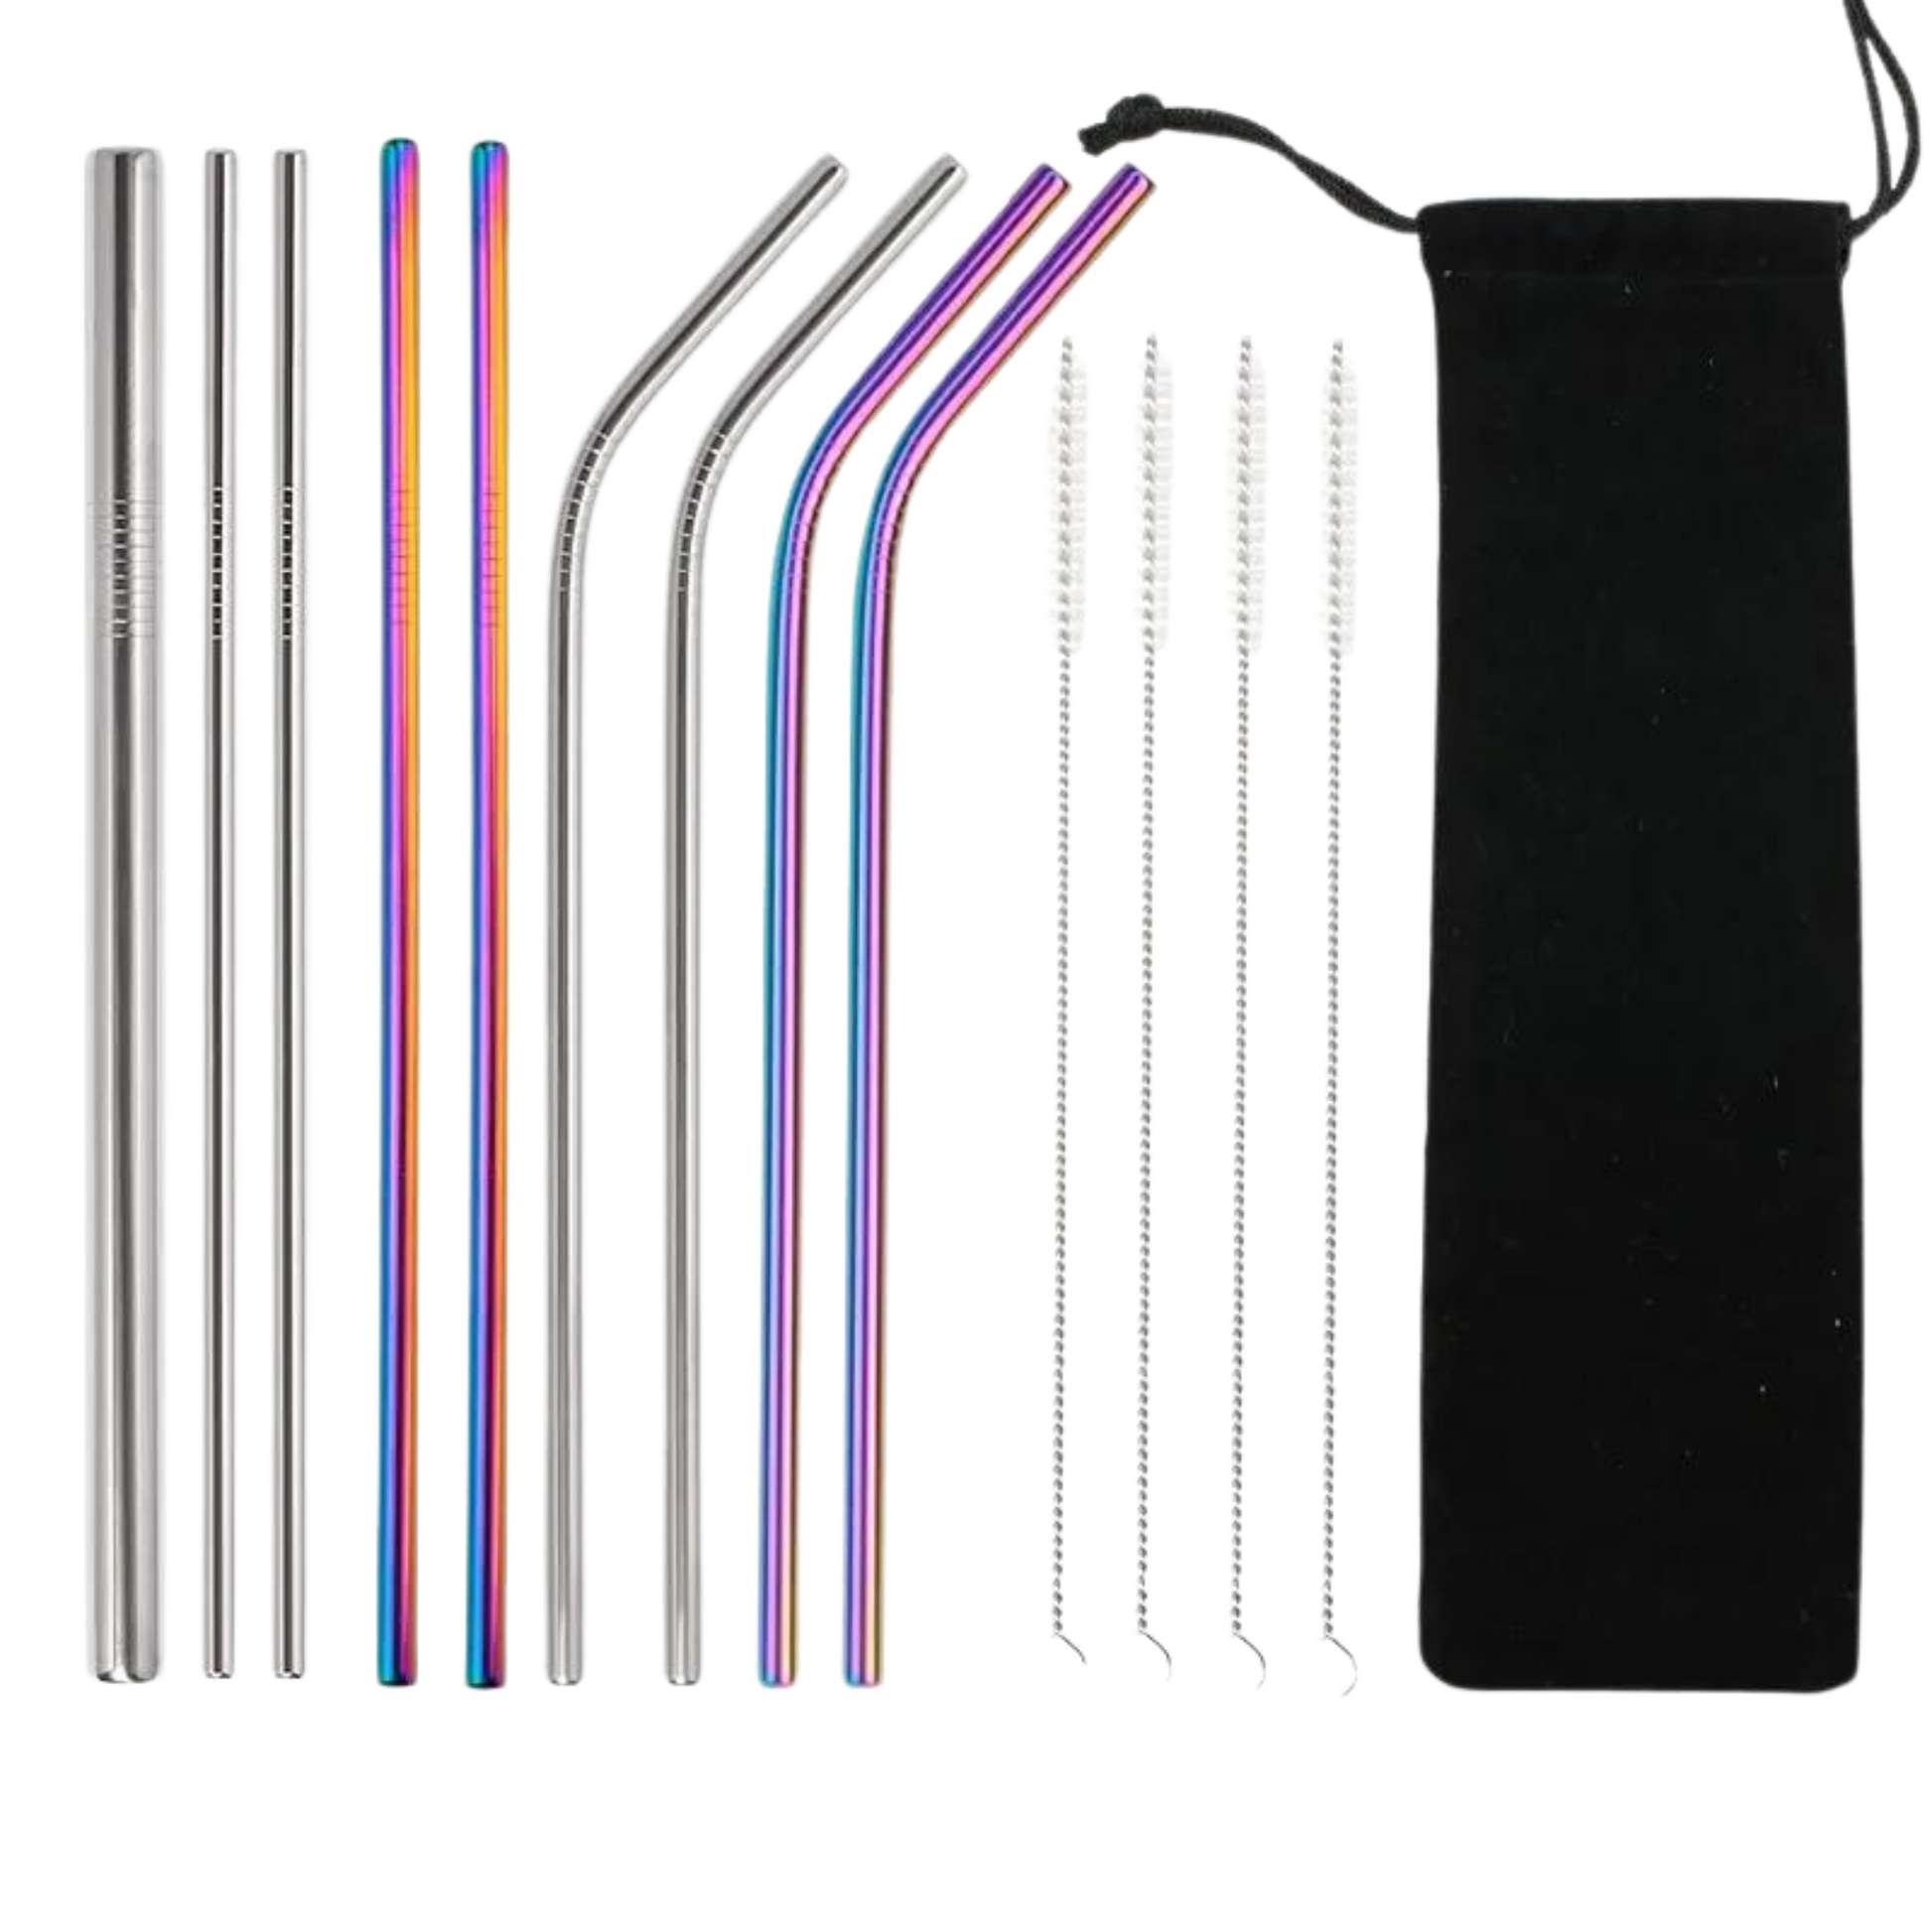 9 mixed colors Stainless Steel Reusable Straws with  cleaning brushes and a bag